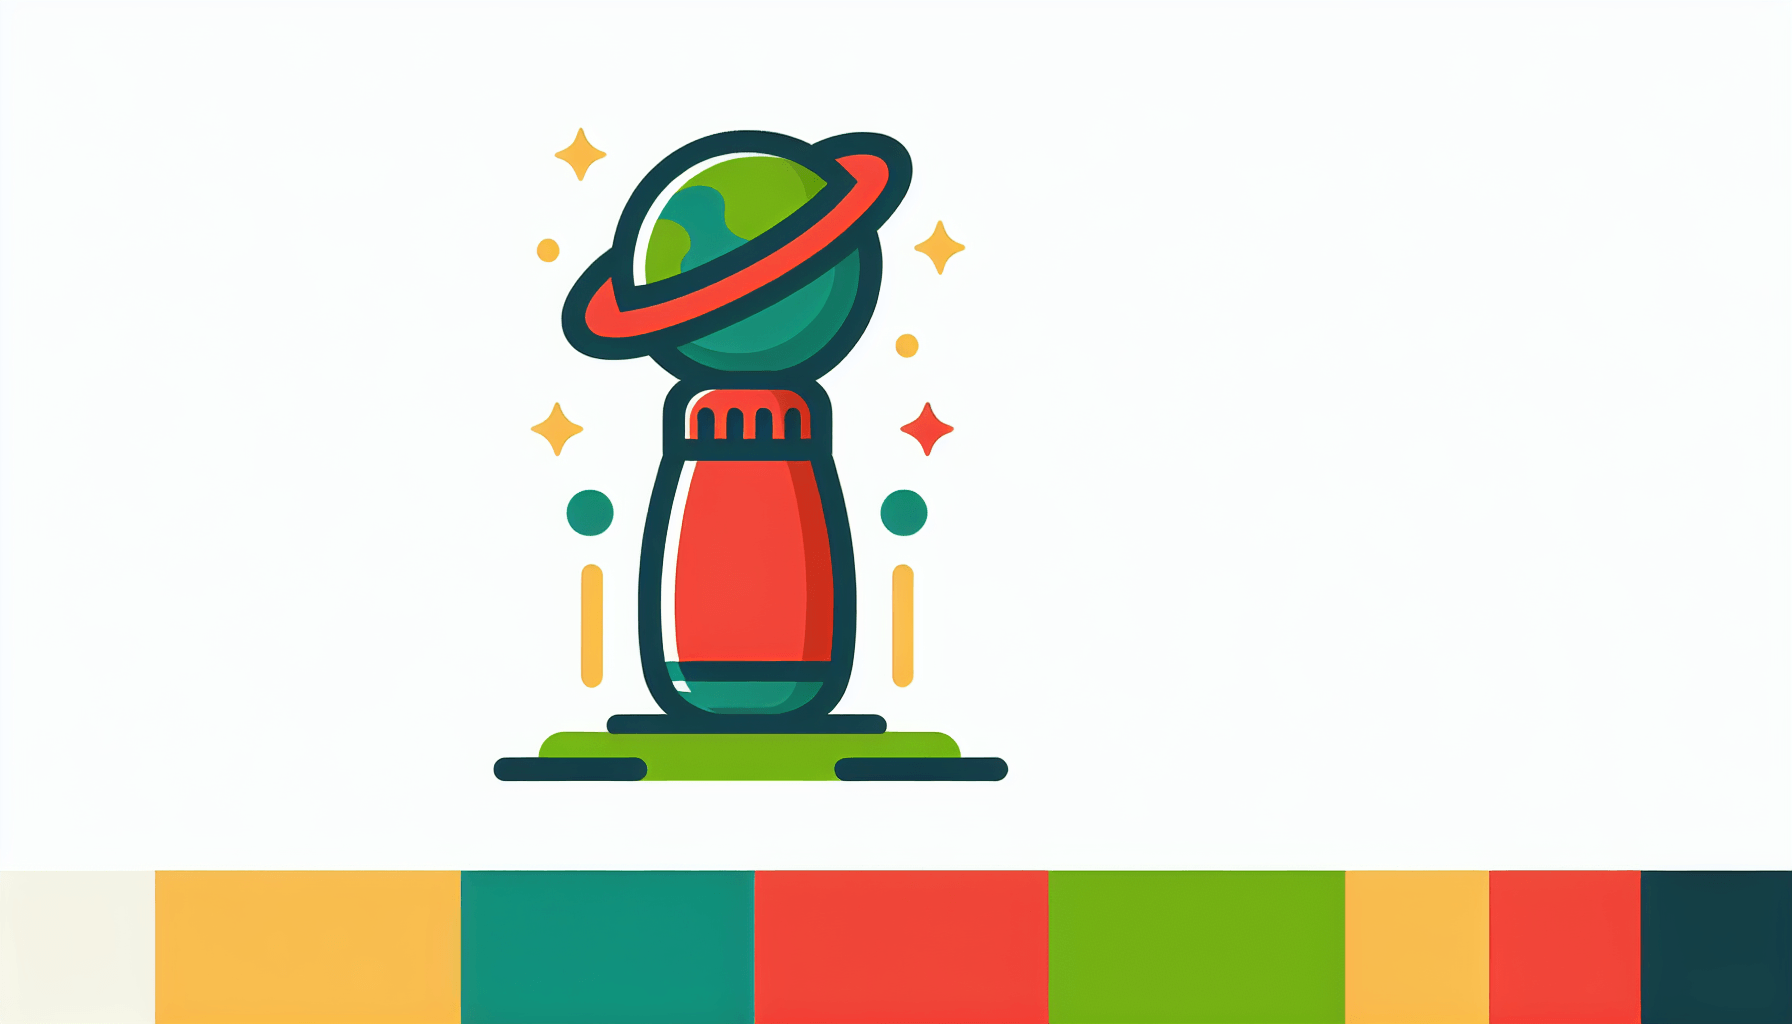 Reusable in flat illustration style and white background, red #f47574, green #88c7a8, yellow #fcc44b, and blue #645bc8 colors.